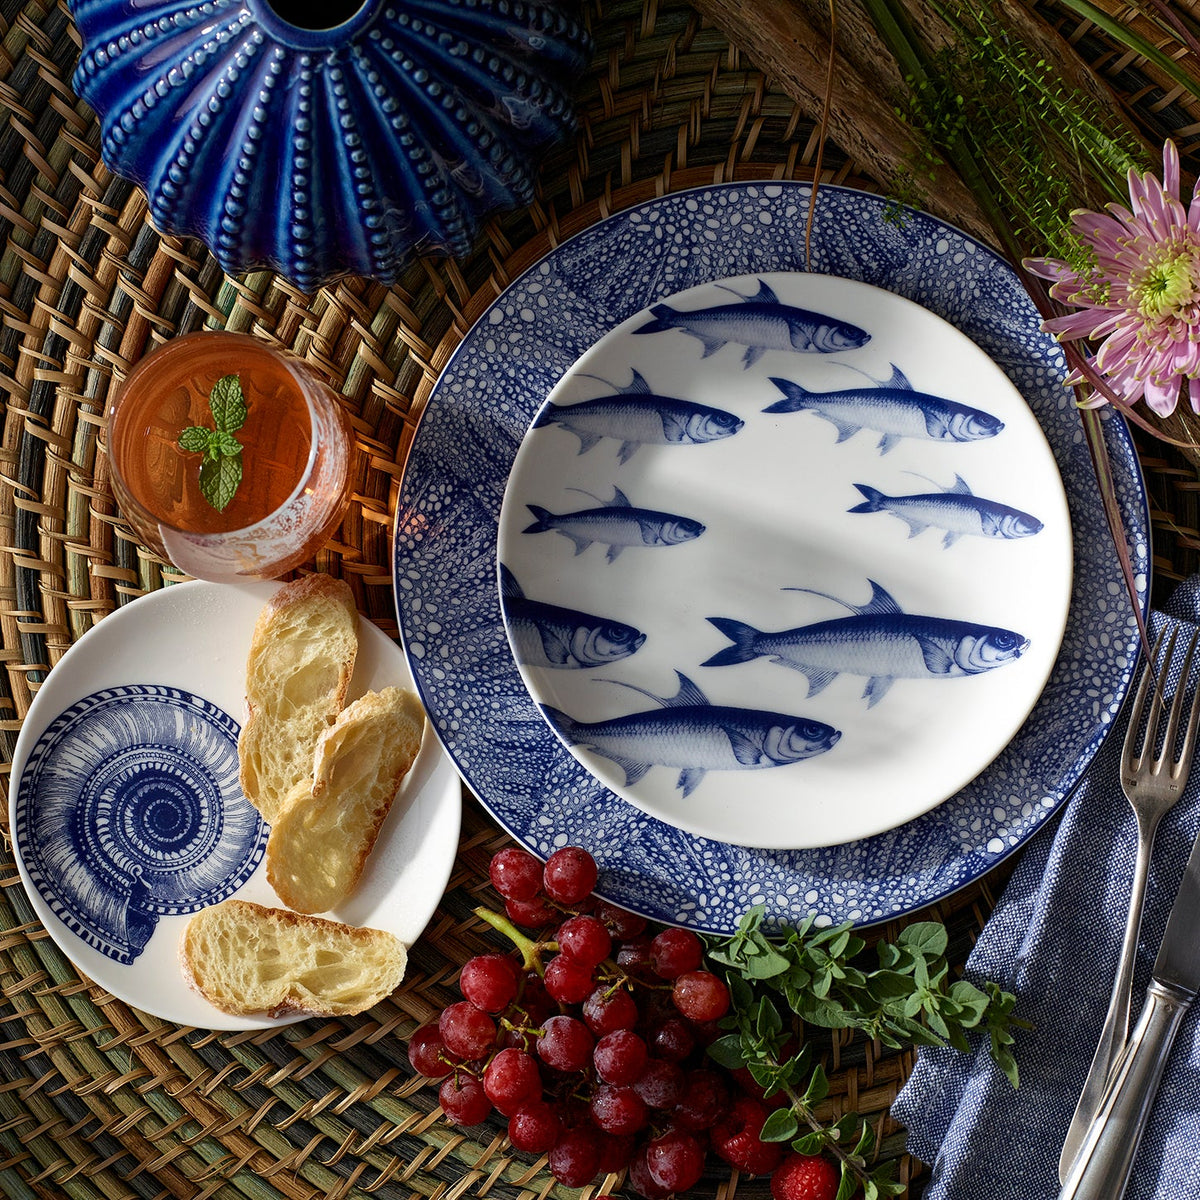 A table setting featuring heirloom-quality dinnerware with blue fish-patterned plates, Shells Small Plates by Caskata Artisanal Home with bread slices, a drink with mint, grapes, a blue cloth napkin, and a purple flower on a woven placemat background.